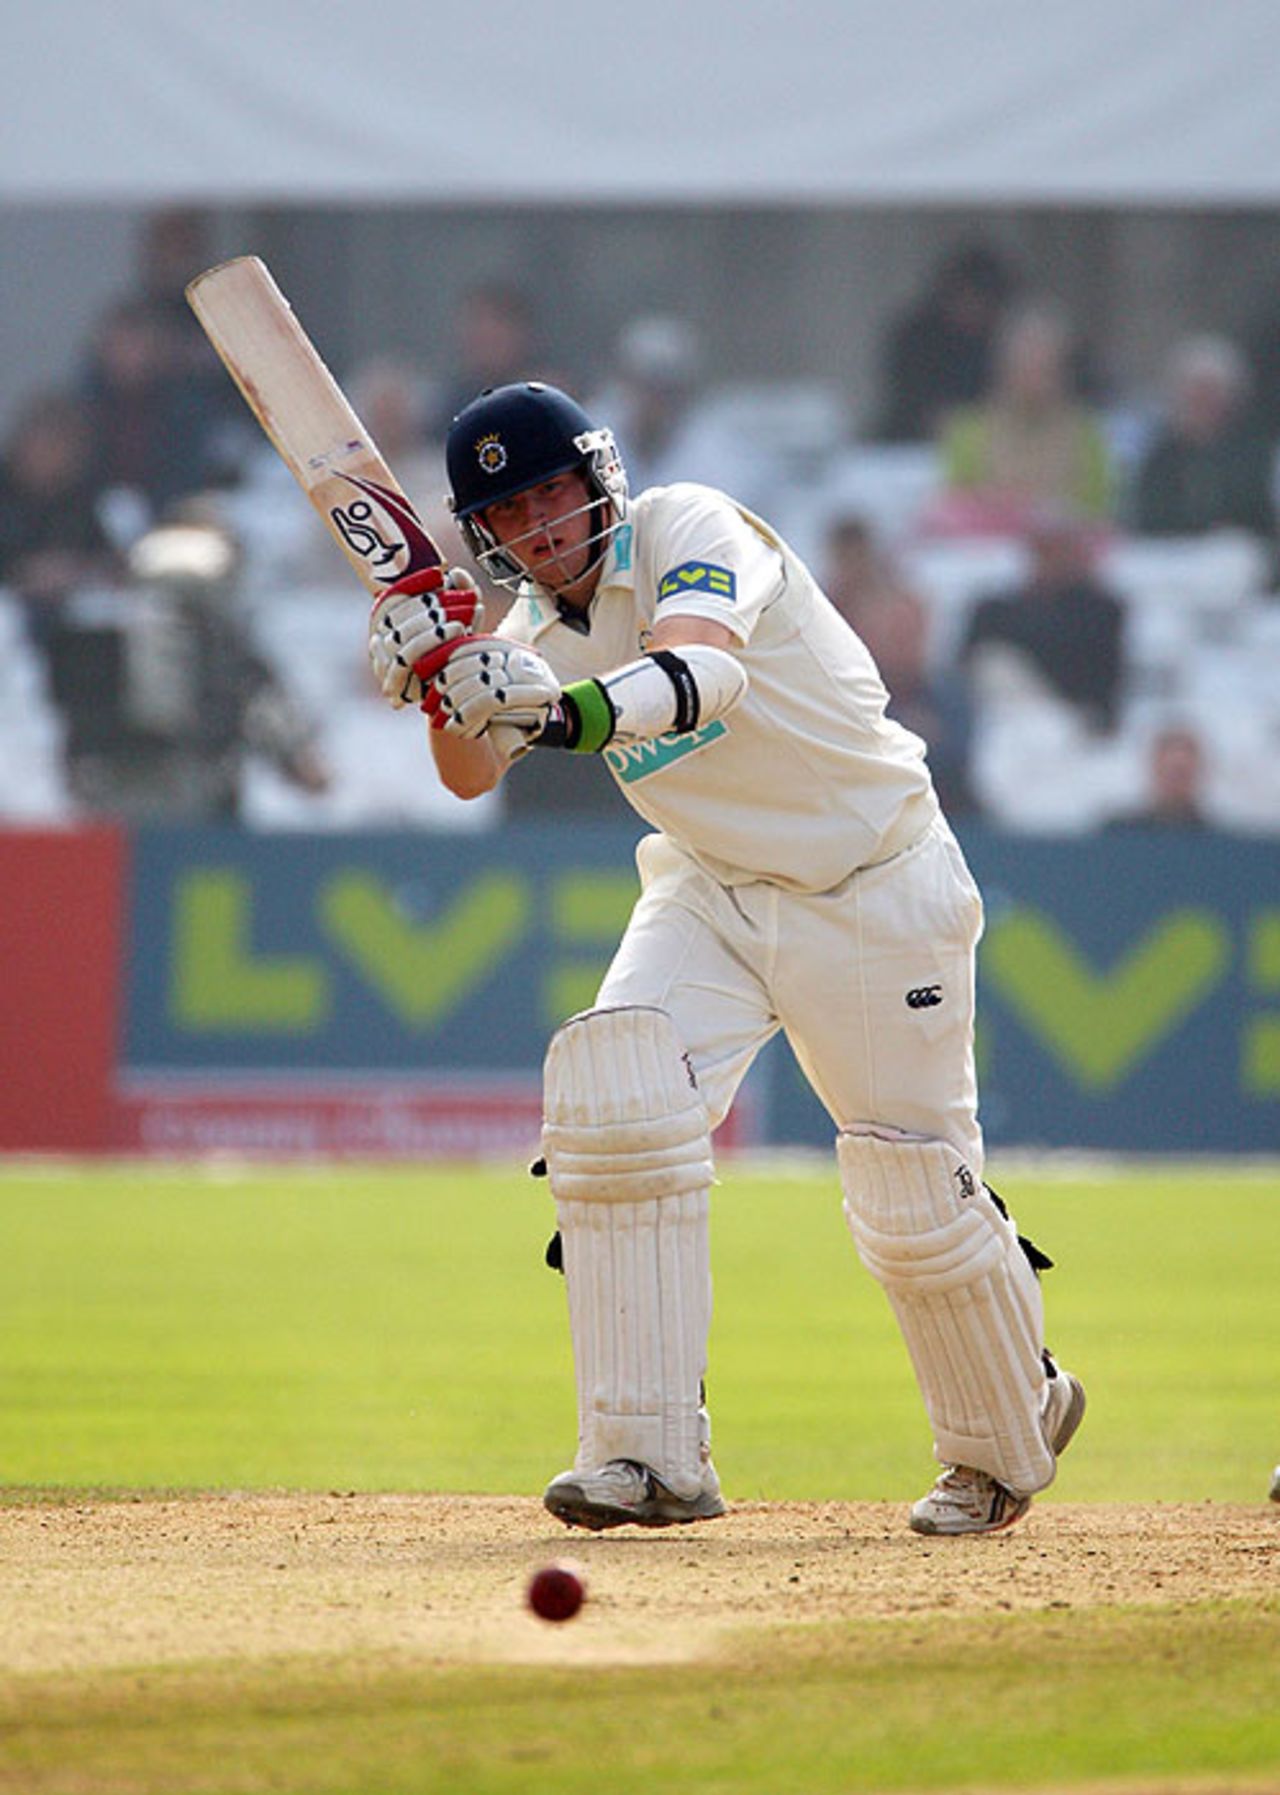 Liam Dawson's maiden first-class hundred ended Nottinghamshire's title hopes, Nottinghamshire v Hampshire, County Championship, September 25, 2008